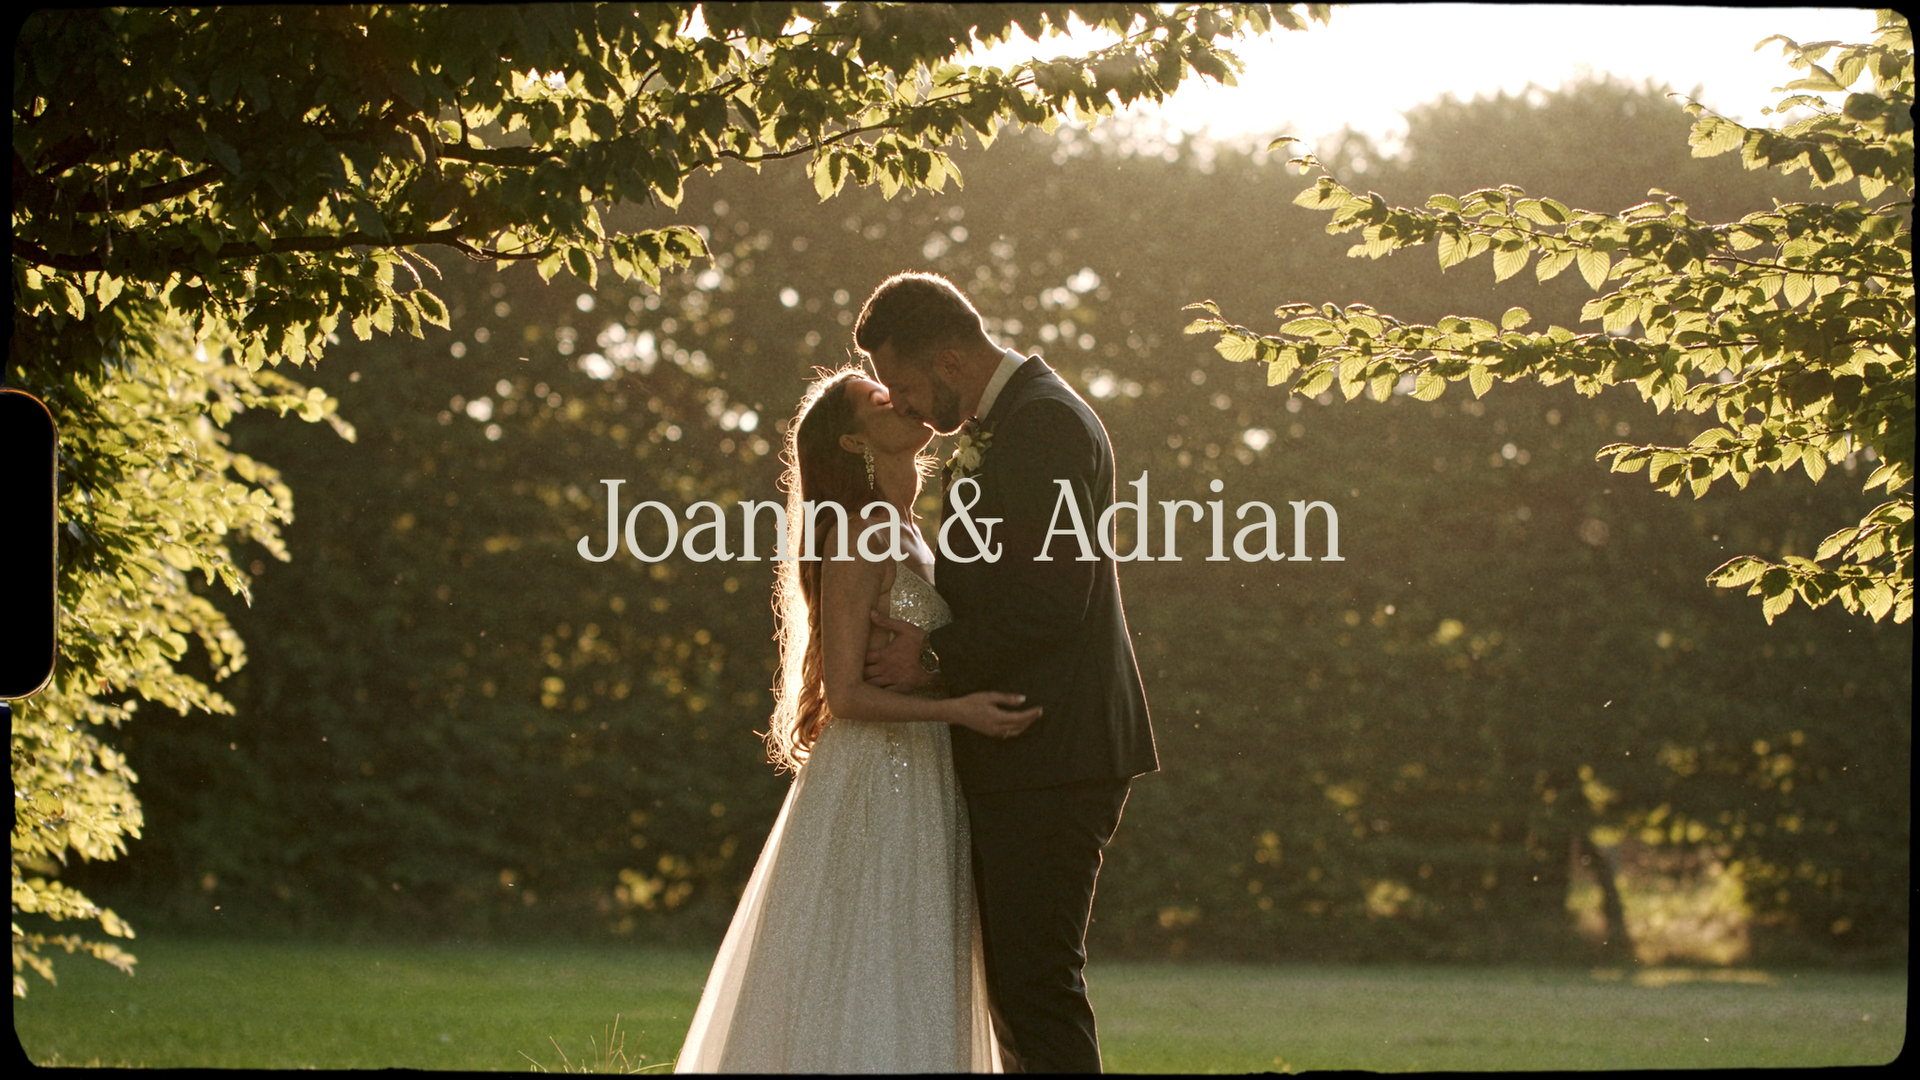 Image of Joanna and Adrian